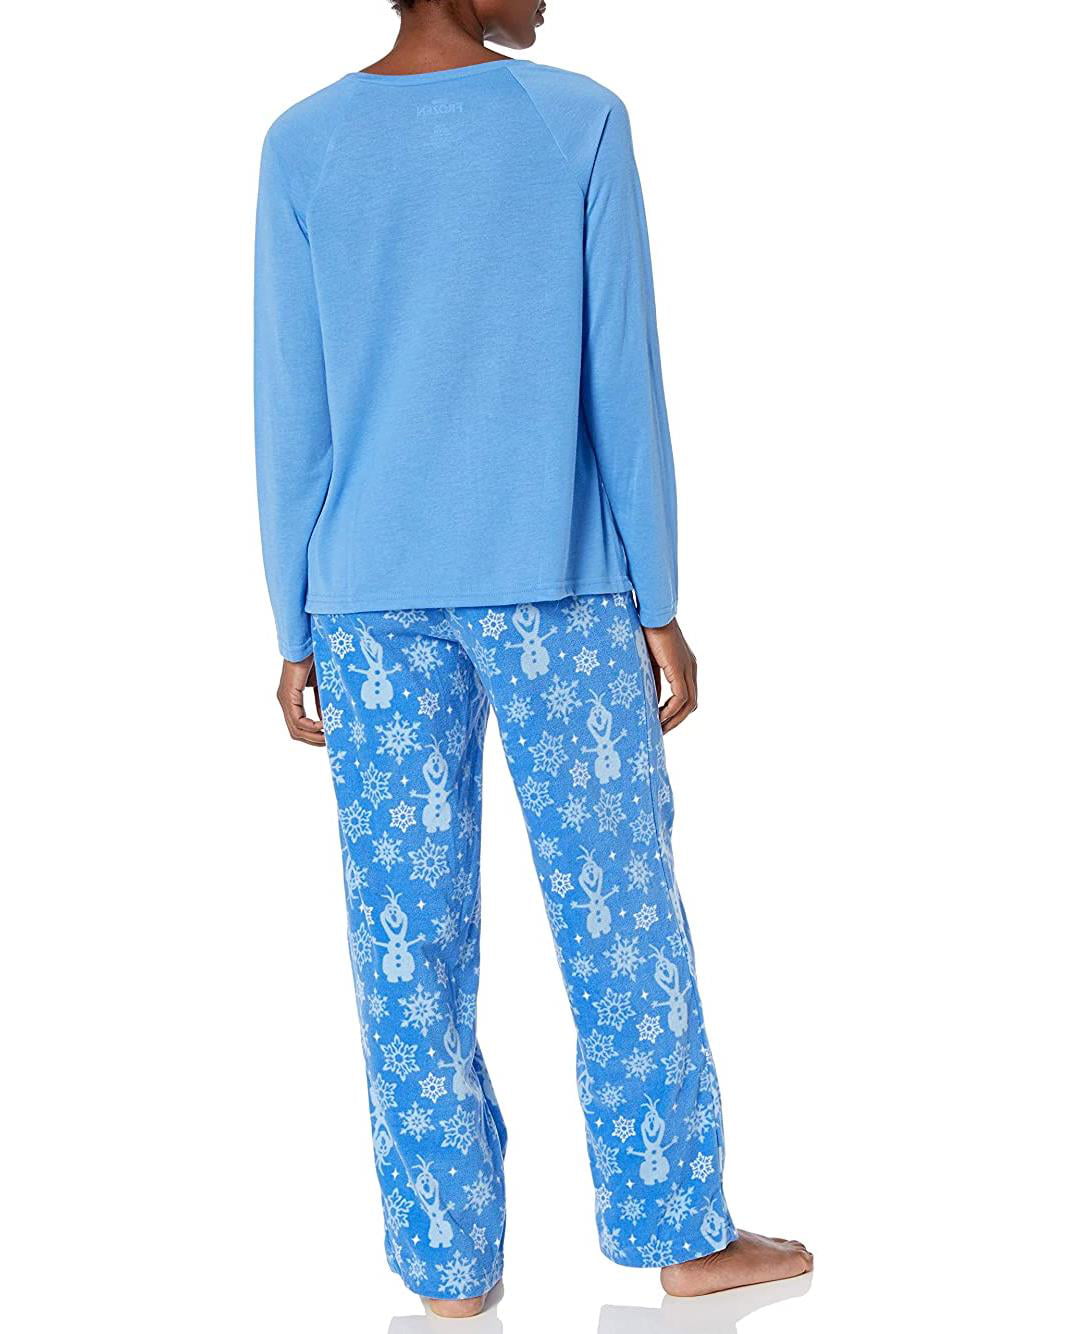 Details about   Womens Briefly Stated Frozen 2 Stronger Together Fleece Pajamas Sleep Set NWT